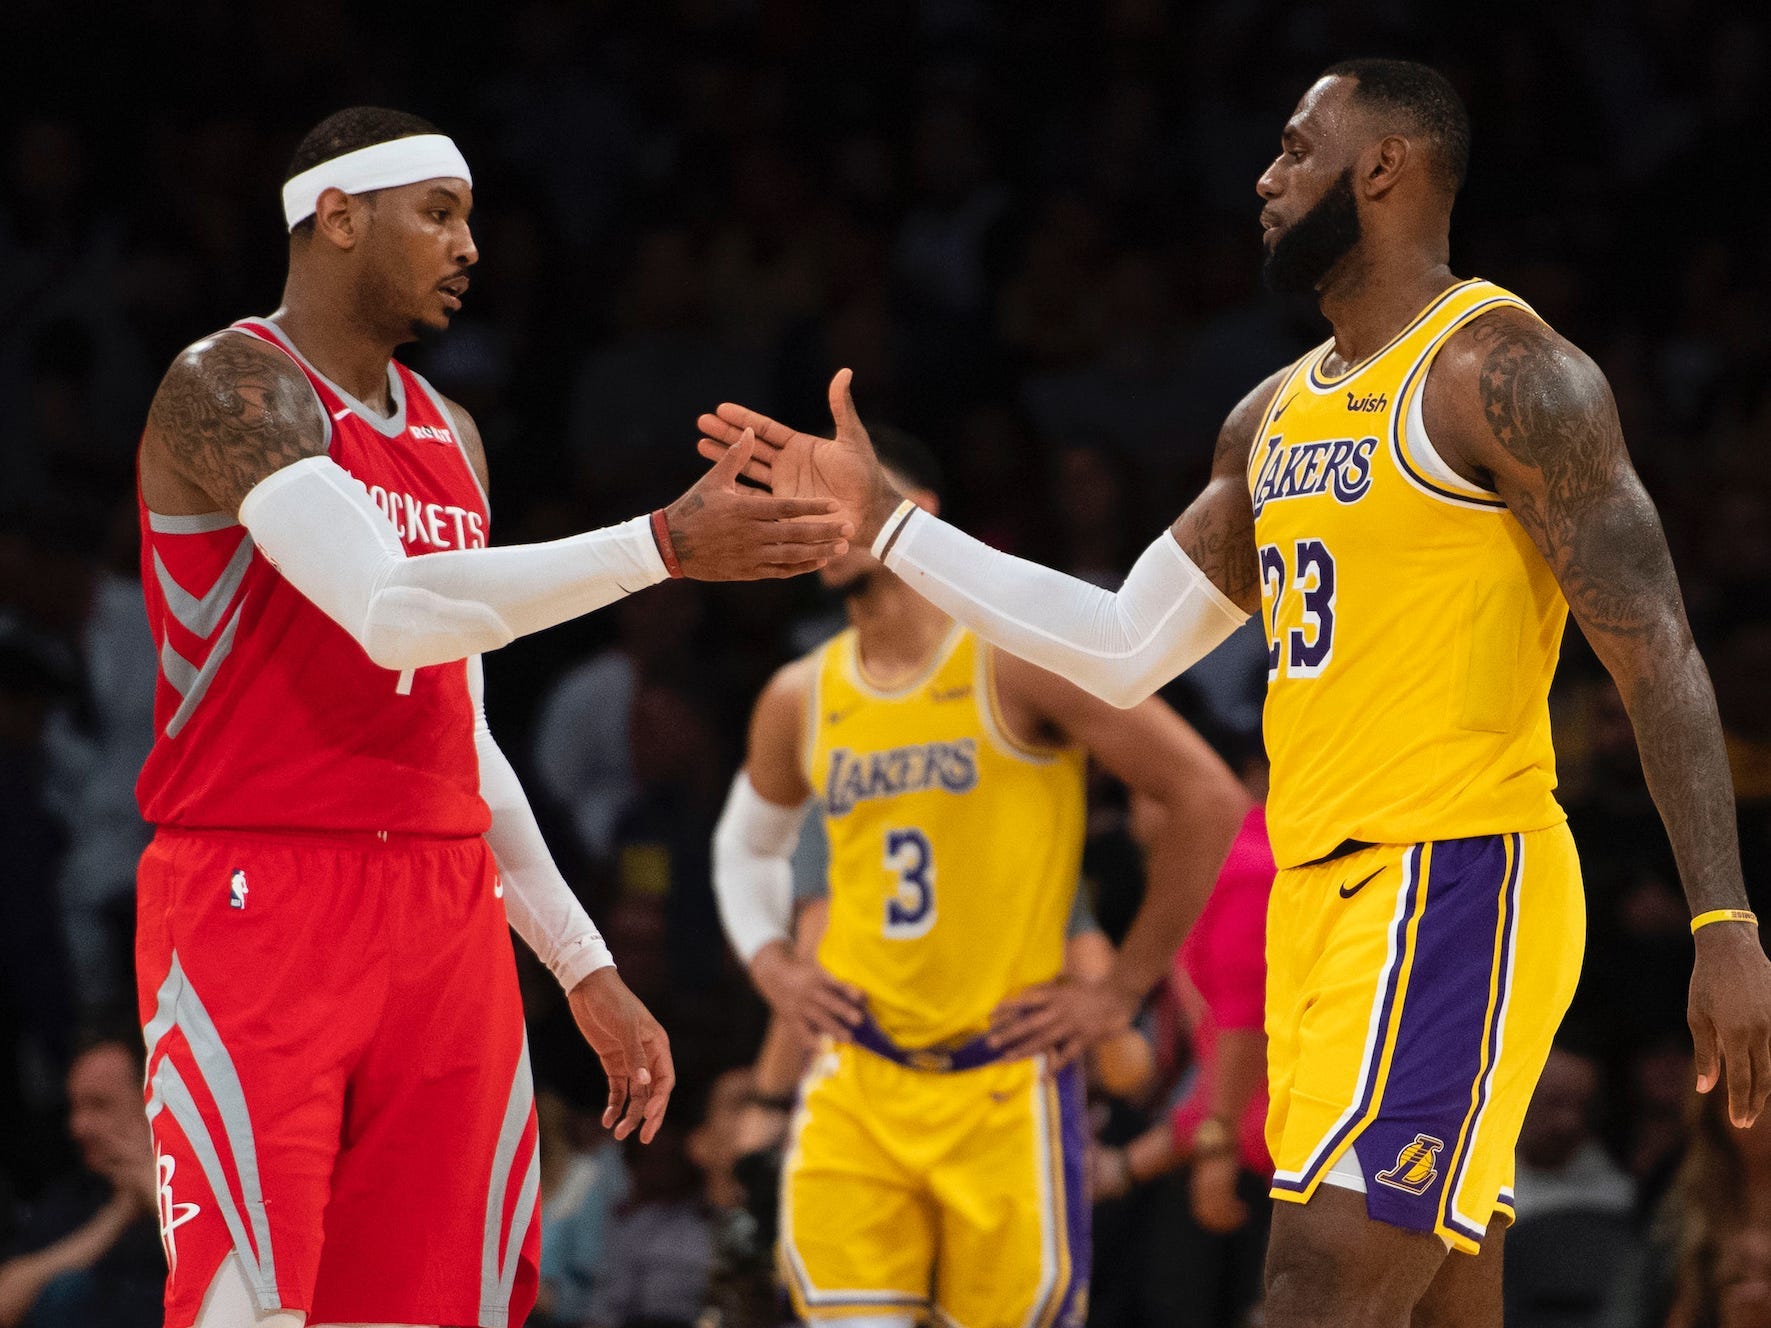 Carmelo Anthony and LeBron James shake hands during a game in 2018.